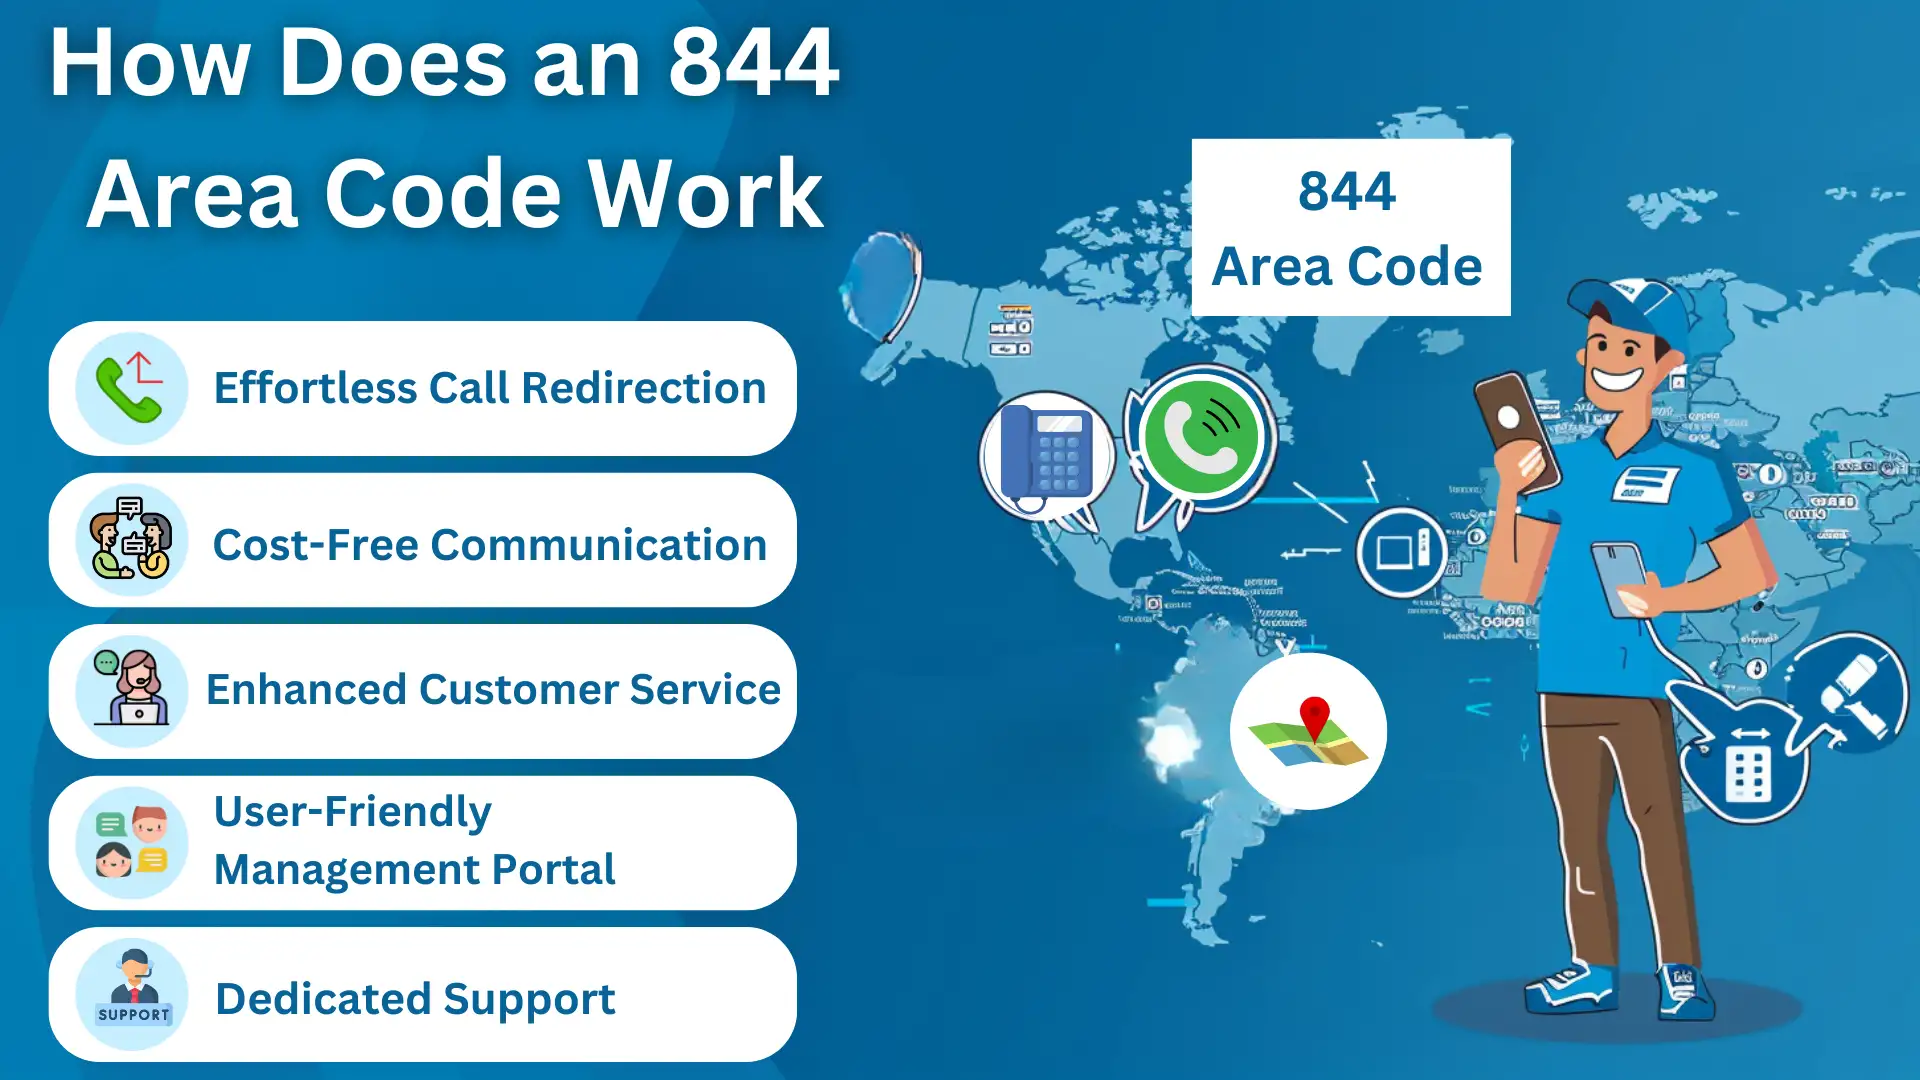 How Does an 844 Area Code Work?